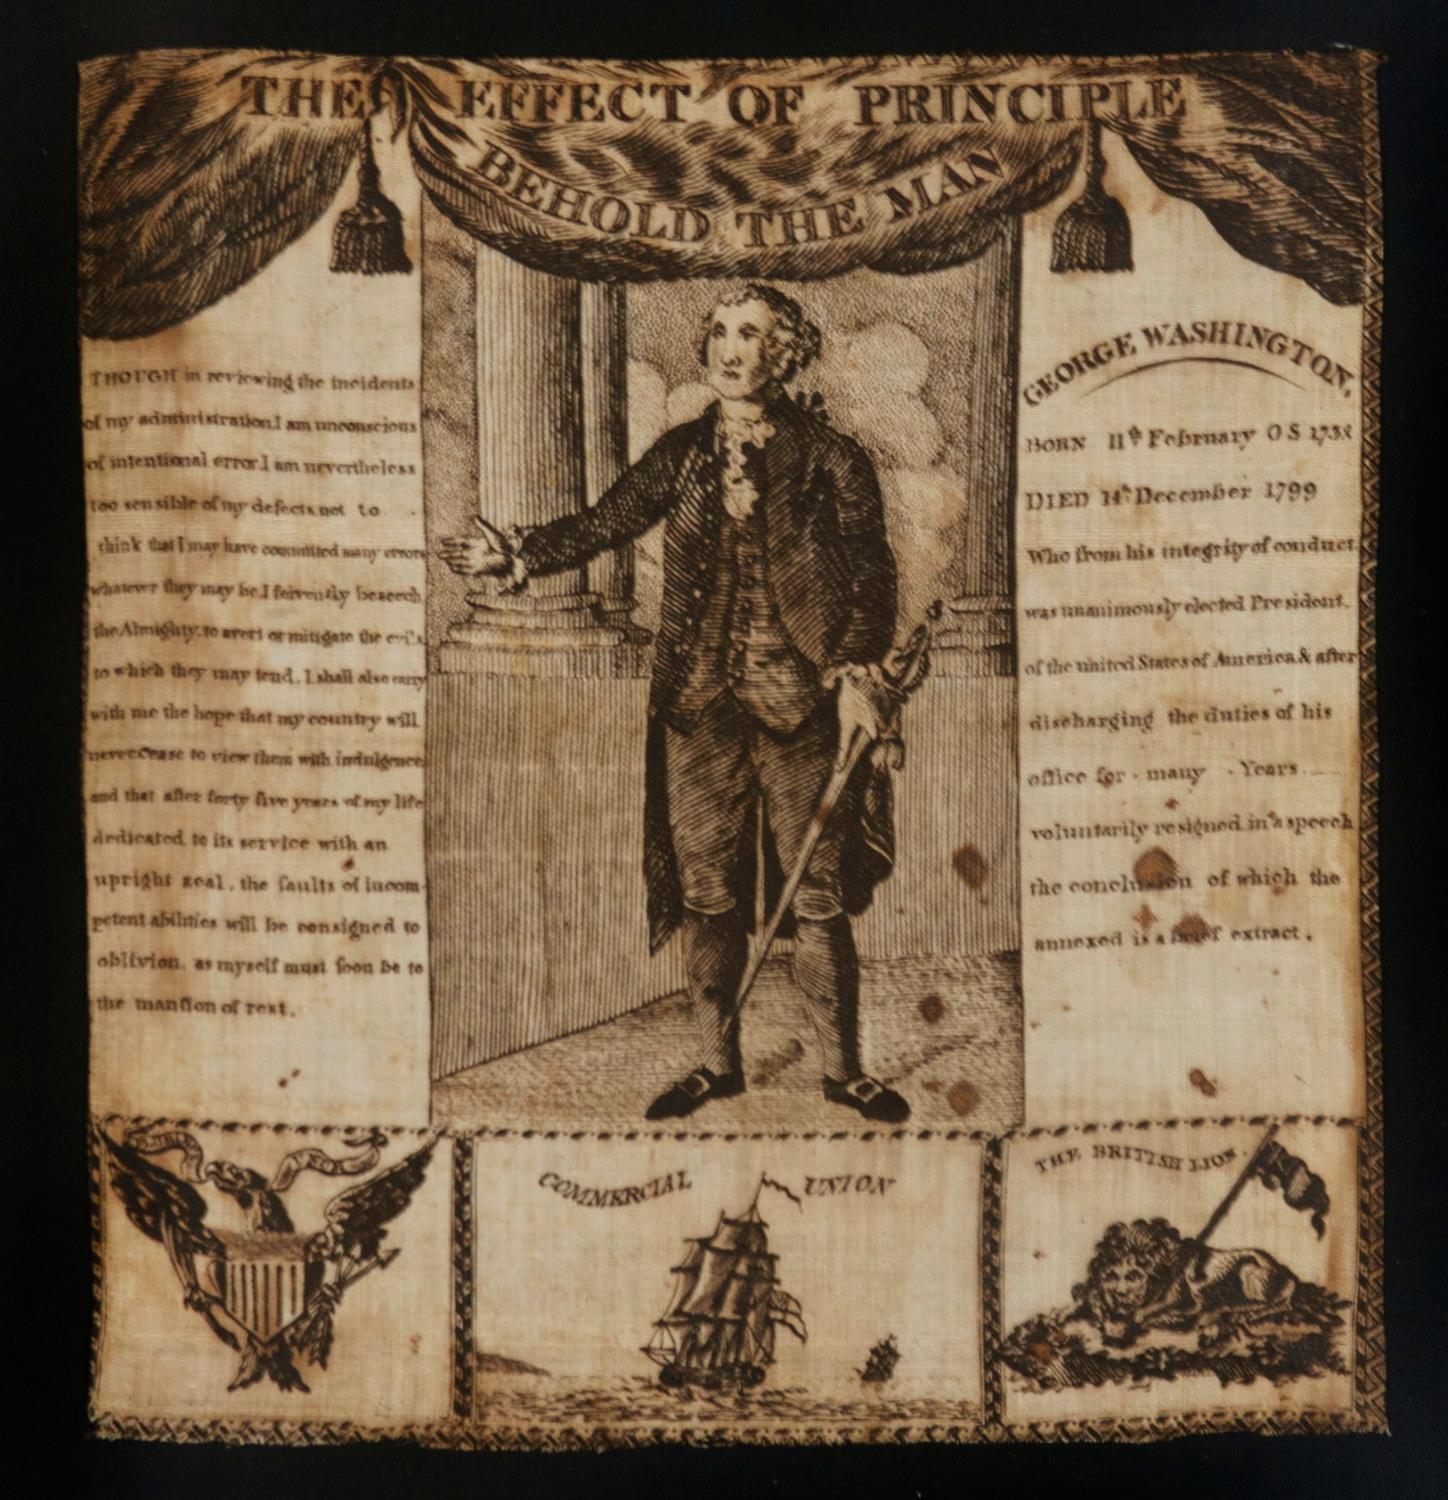 Extraordinarily early (1806) printed linen kerchief glorifying George Washington, Germantown print works, Germantown, Pennsylvania

Printed in sepia ink on coarse, white linen, this patriotic kerchief shows a standing portrait of George